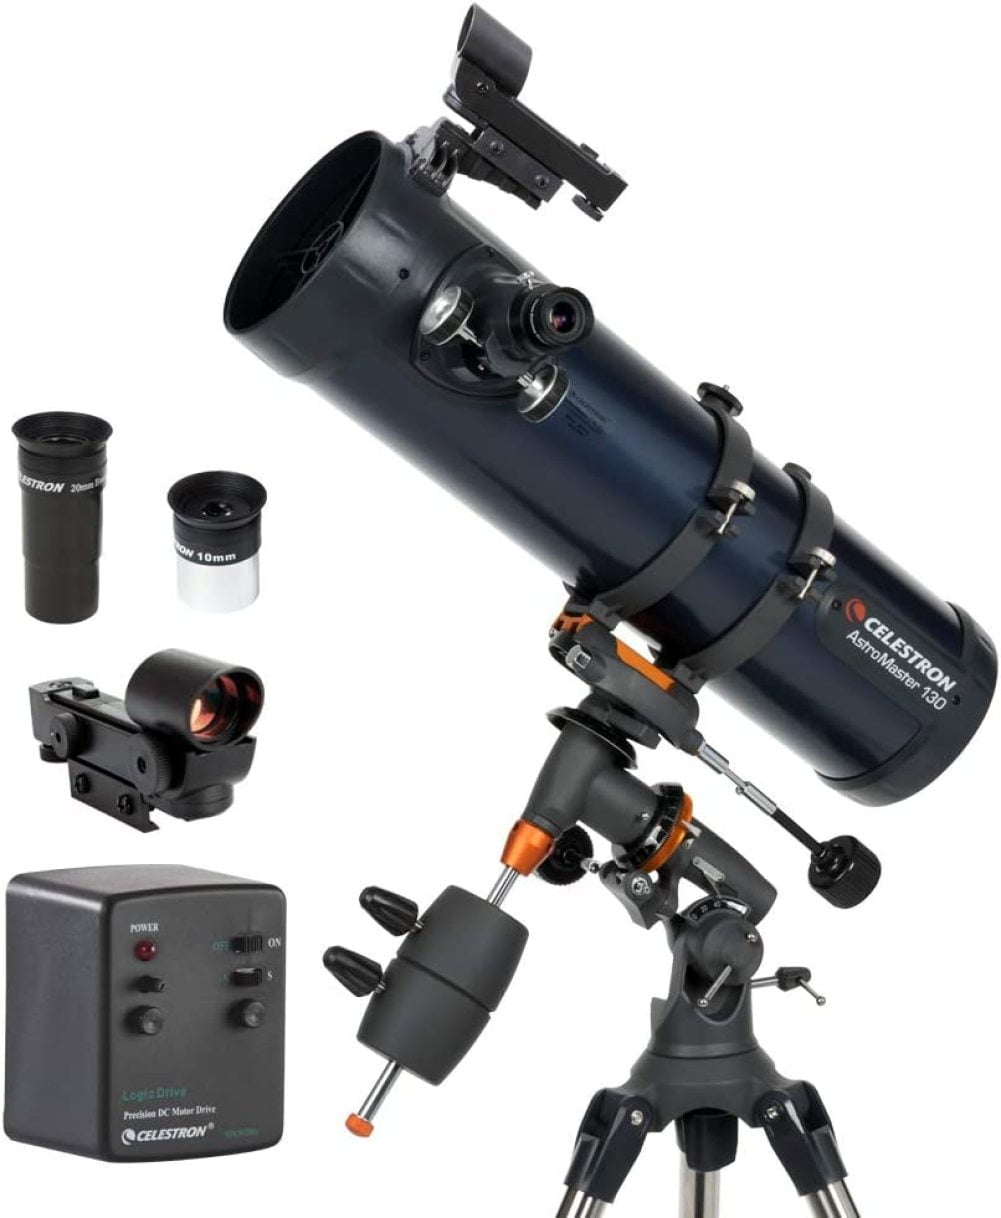 Celestron - AstroMaster 130EQ-MD Newtonian Telescope - Reflector Telescope for Beginners - Fully-Coated Glass Optics - Adjustable-Height Tripod - BONUS Astronomy Software Package pic